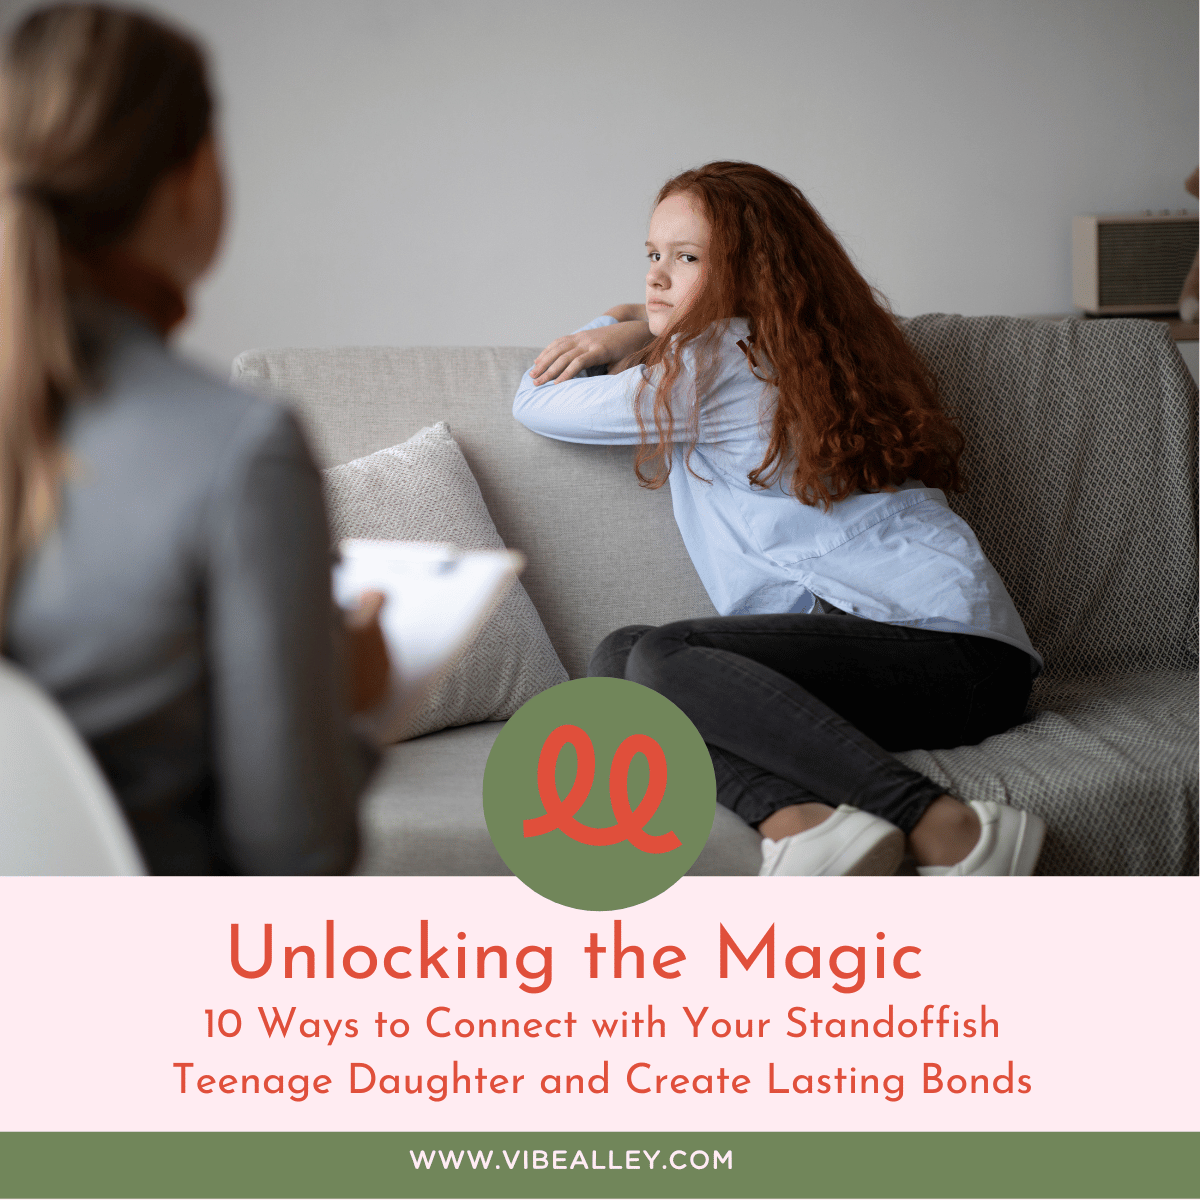 Unlocking the Magic: 10 Ways to Connect with Your Standoffish Teenage Daughter and Create Lasting Bonds